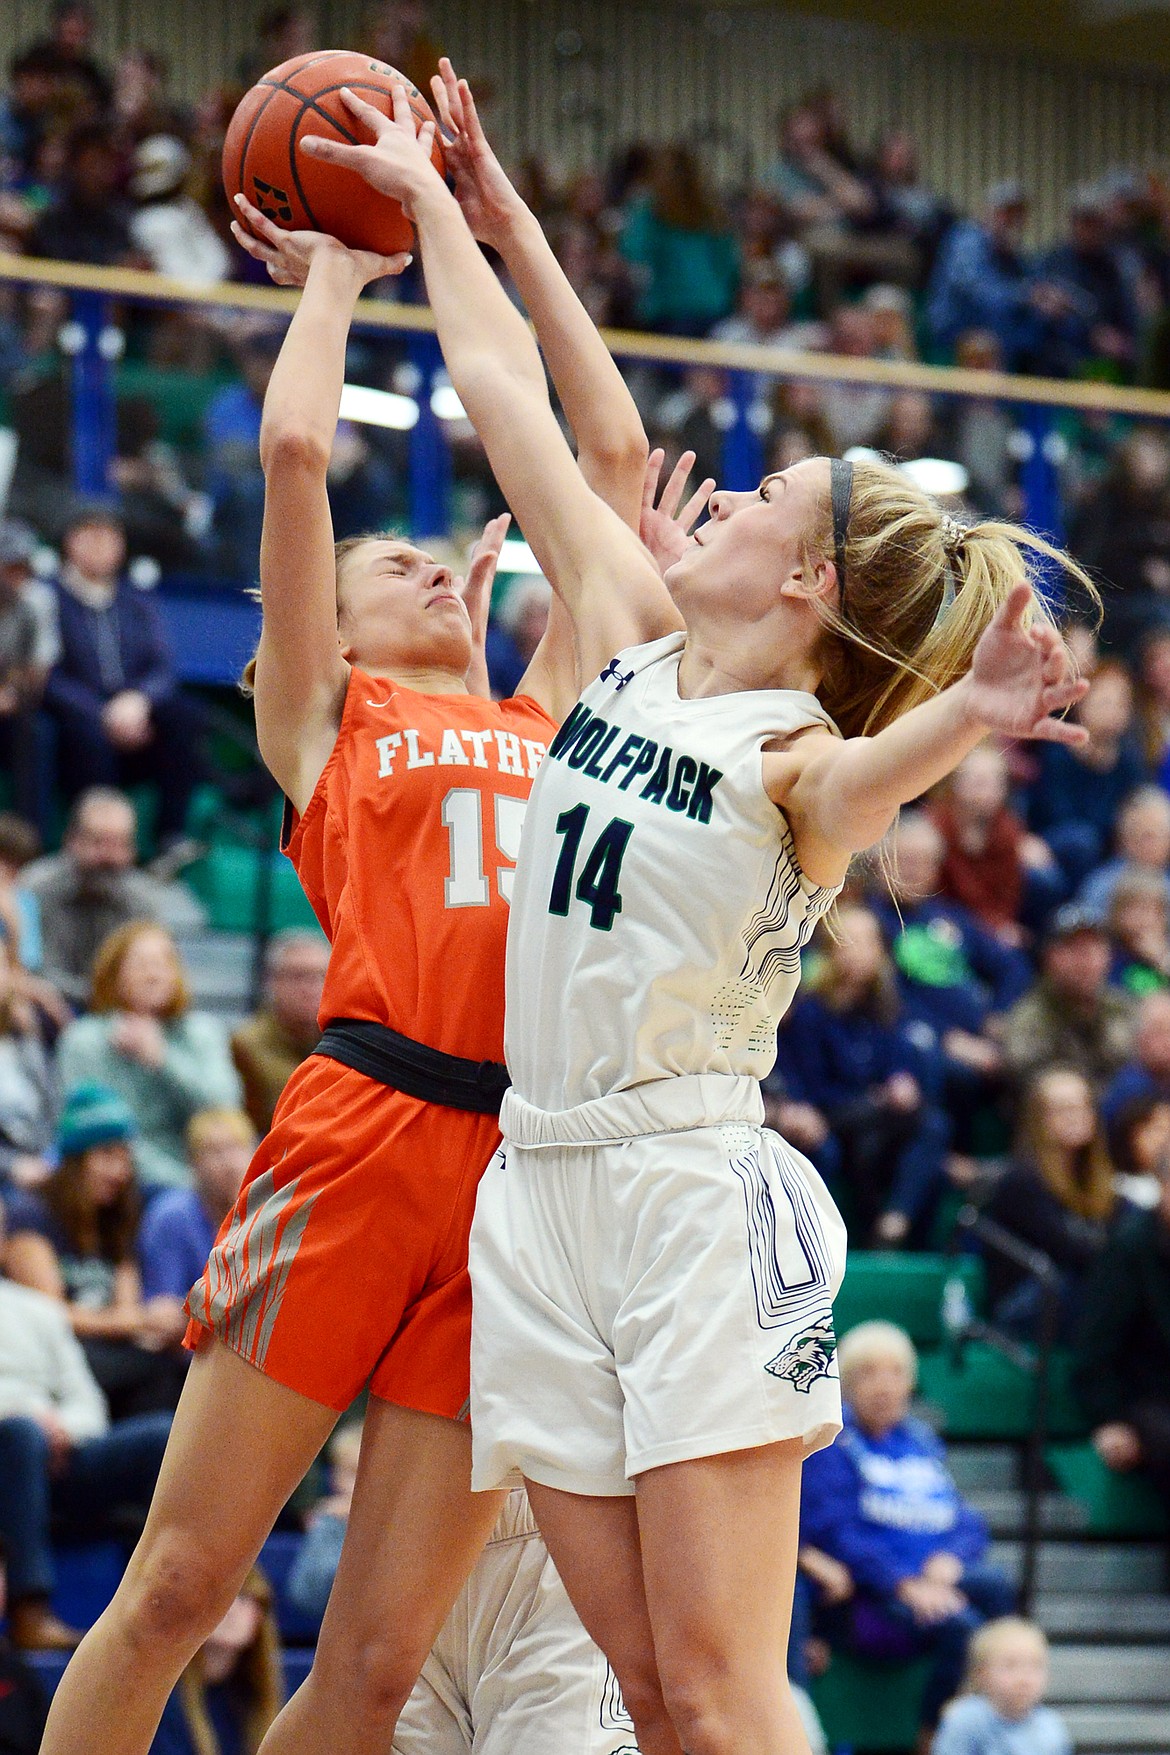 Glacier's Aubrie Rademacher (14) blocks the shot of Flathead's Clare Converse (15) during a crosstown matchup at Glacier High School on Friday. (Casey Kreider/Daily Inter Lake)